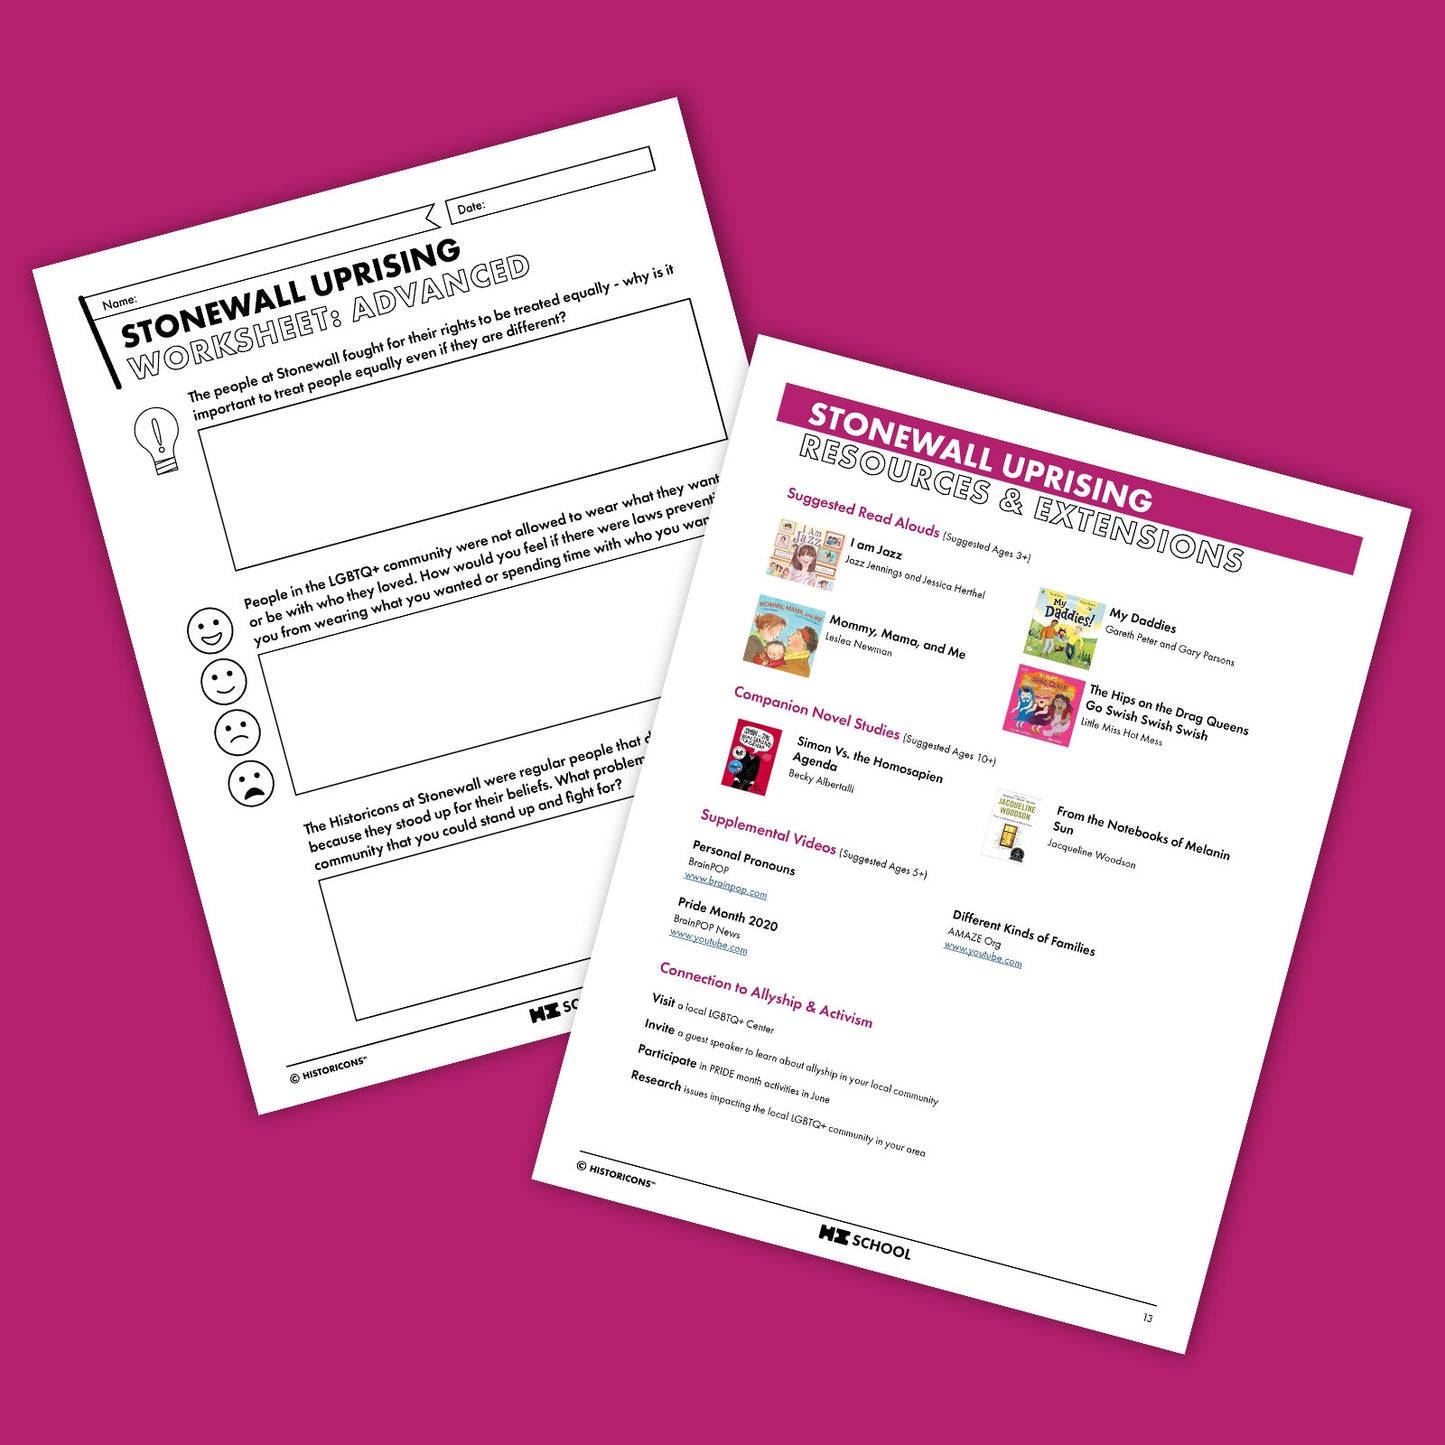 Two more pages of the HI School Stonewall Uprising Activity Pack are pictured. One page is titled "Worksheet: Advanced" and another is titled "Resources & Extensions"